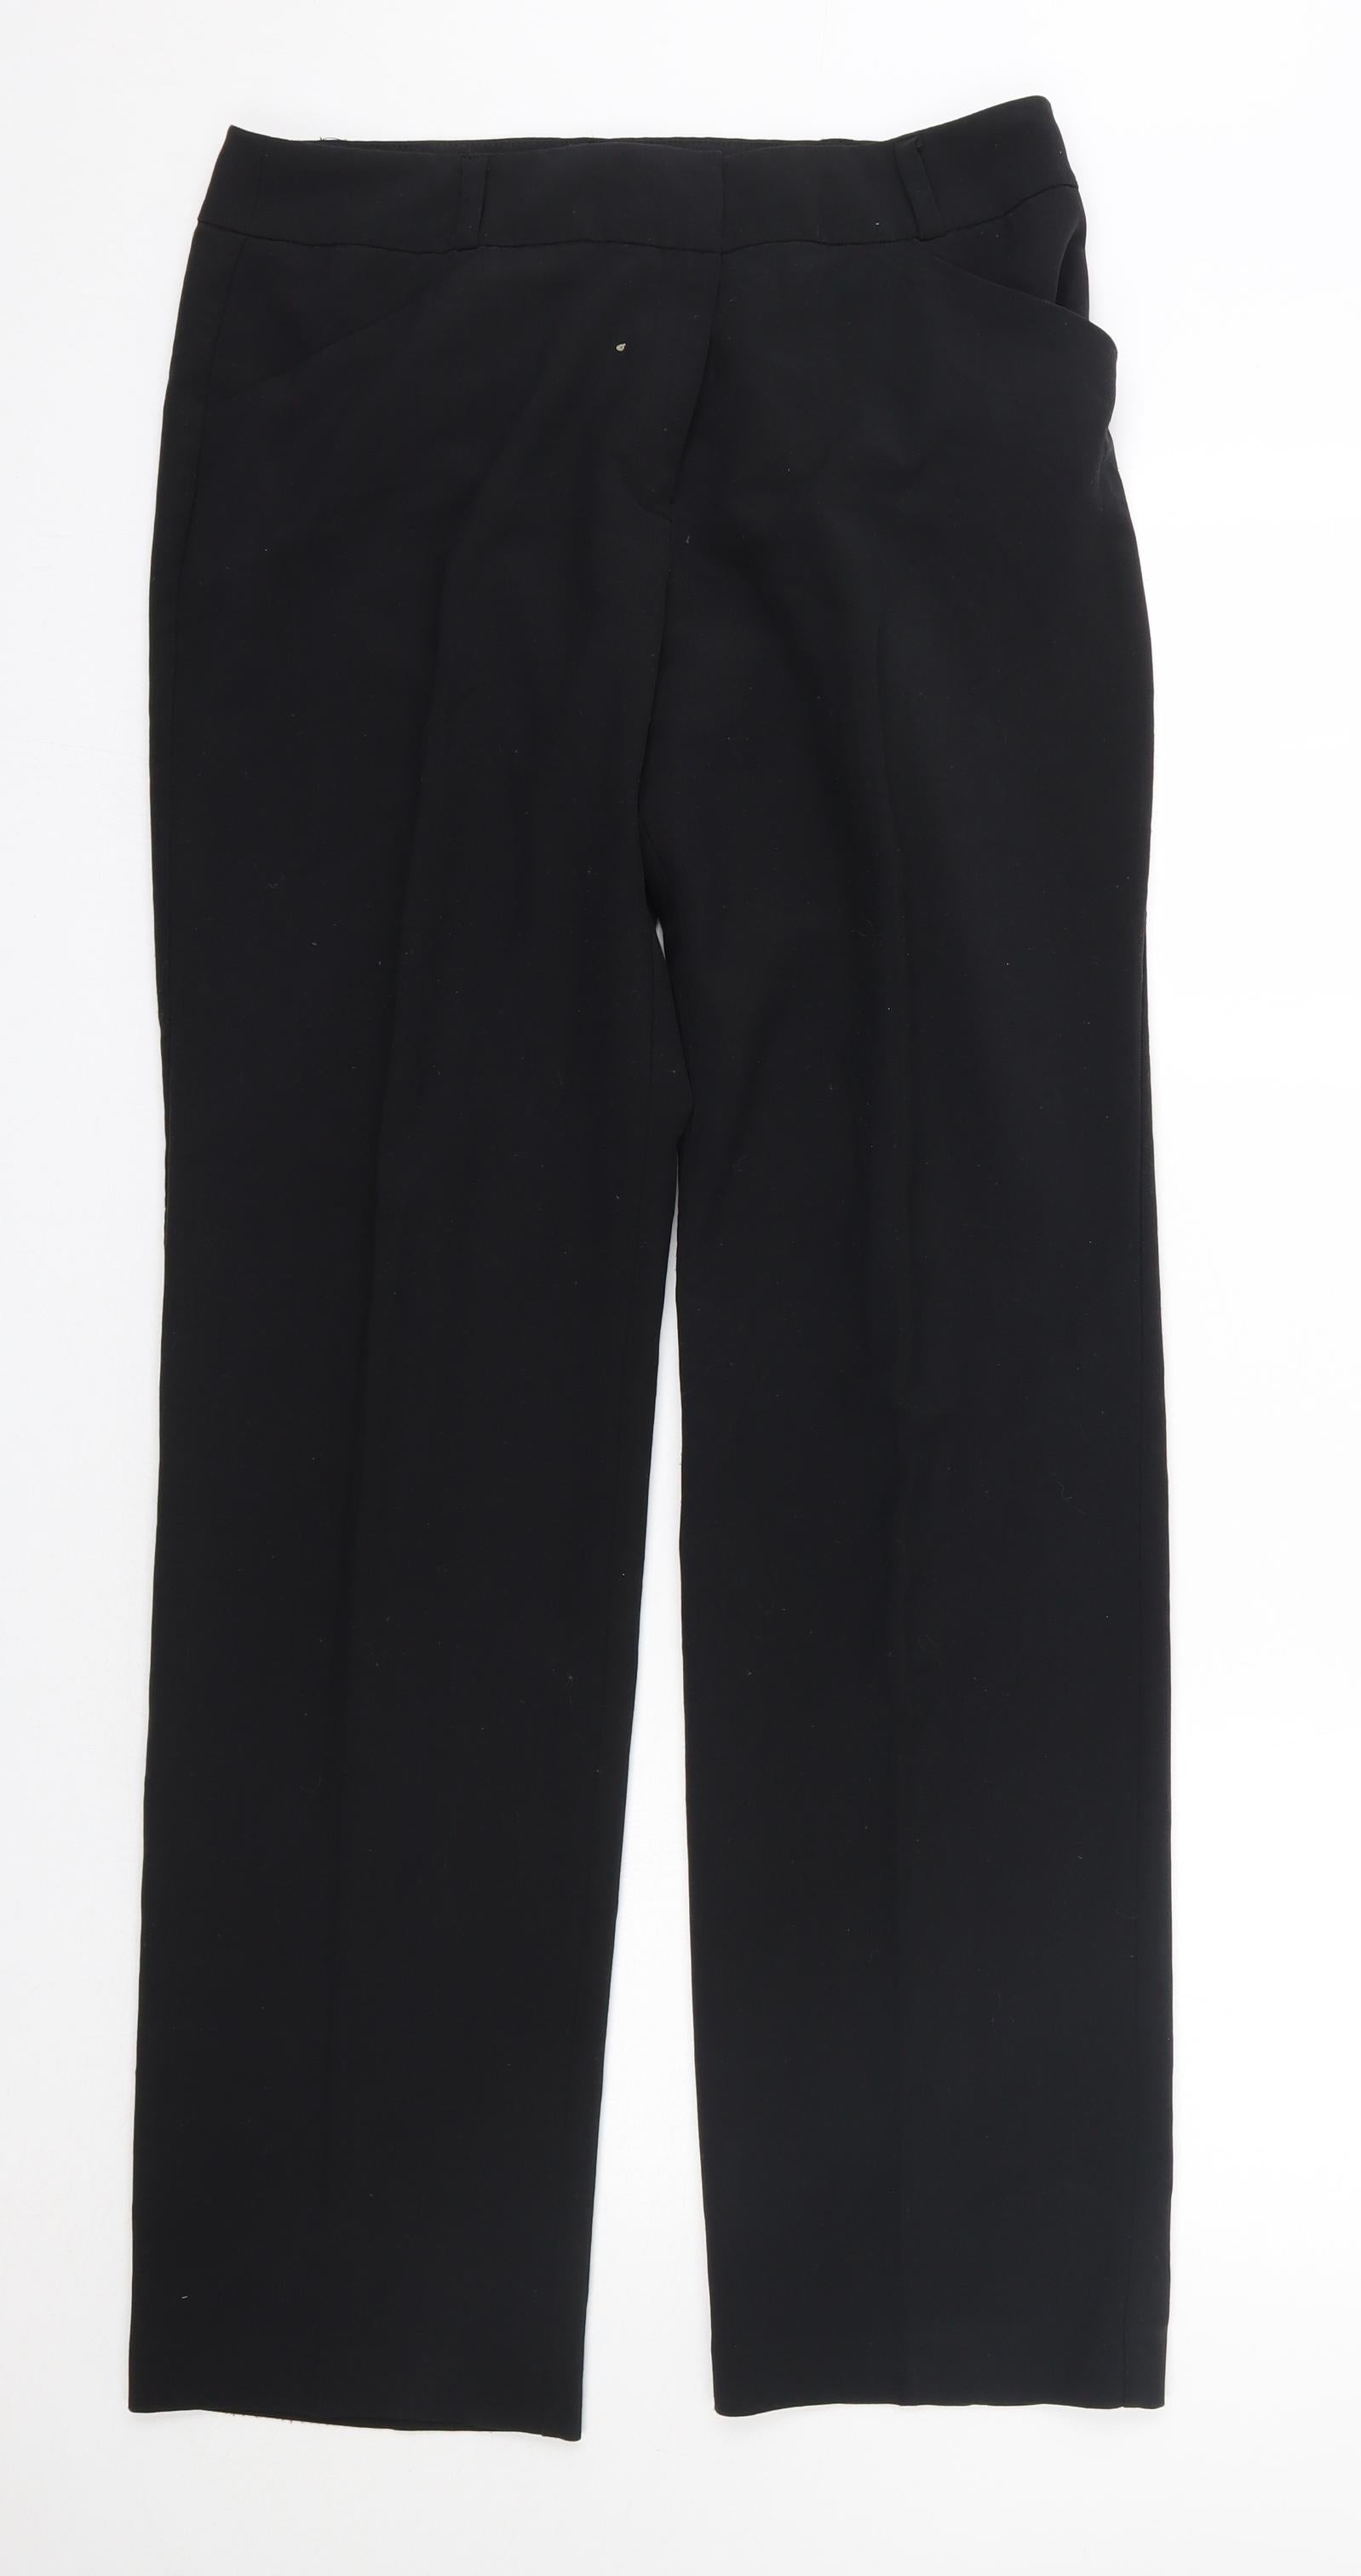 Long Tall Sally Womens Black Polyester Dress Pants Trousers Size